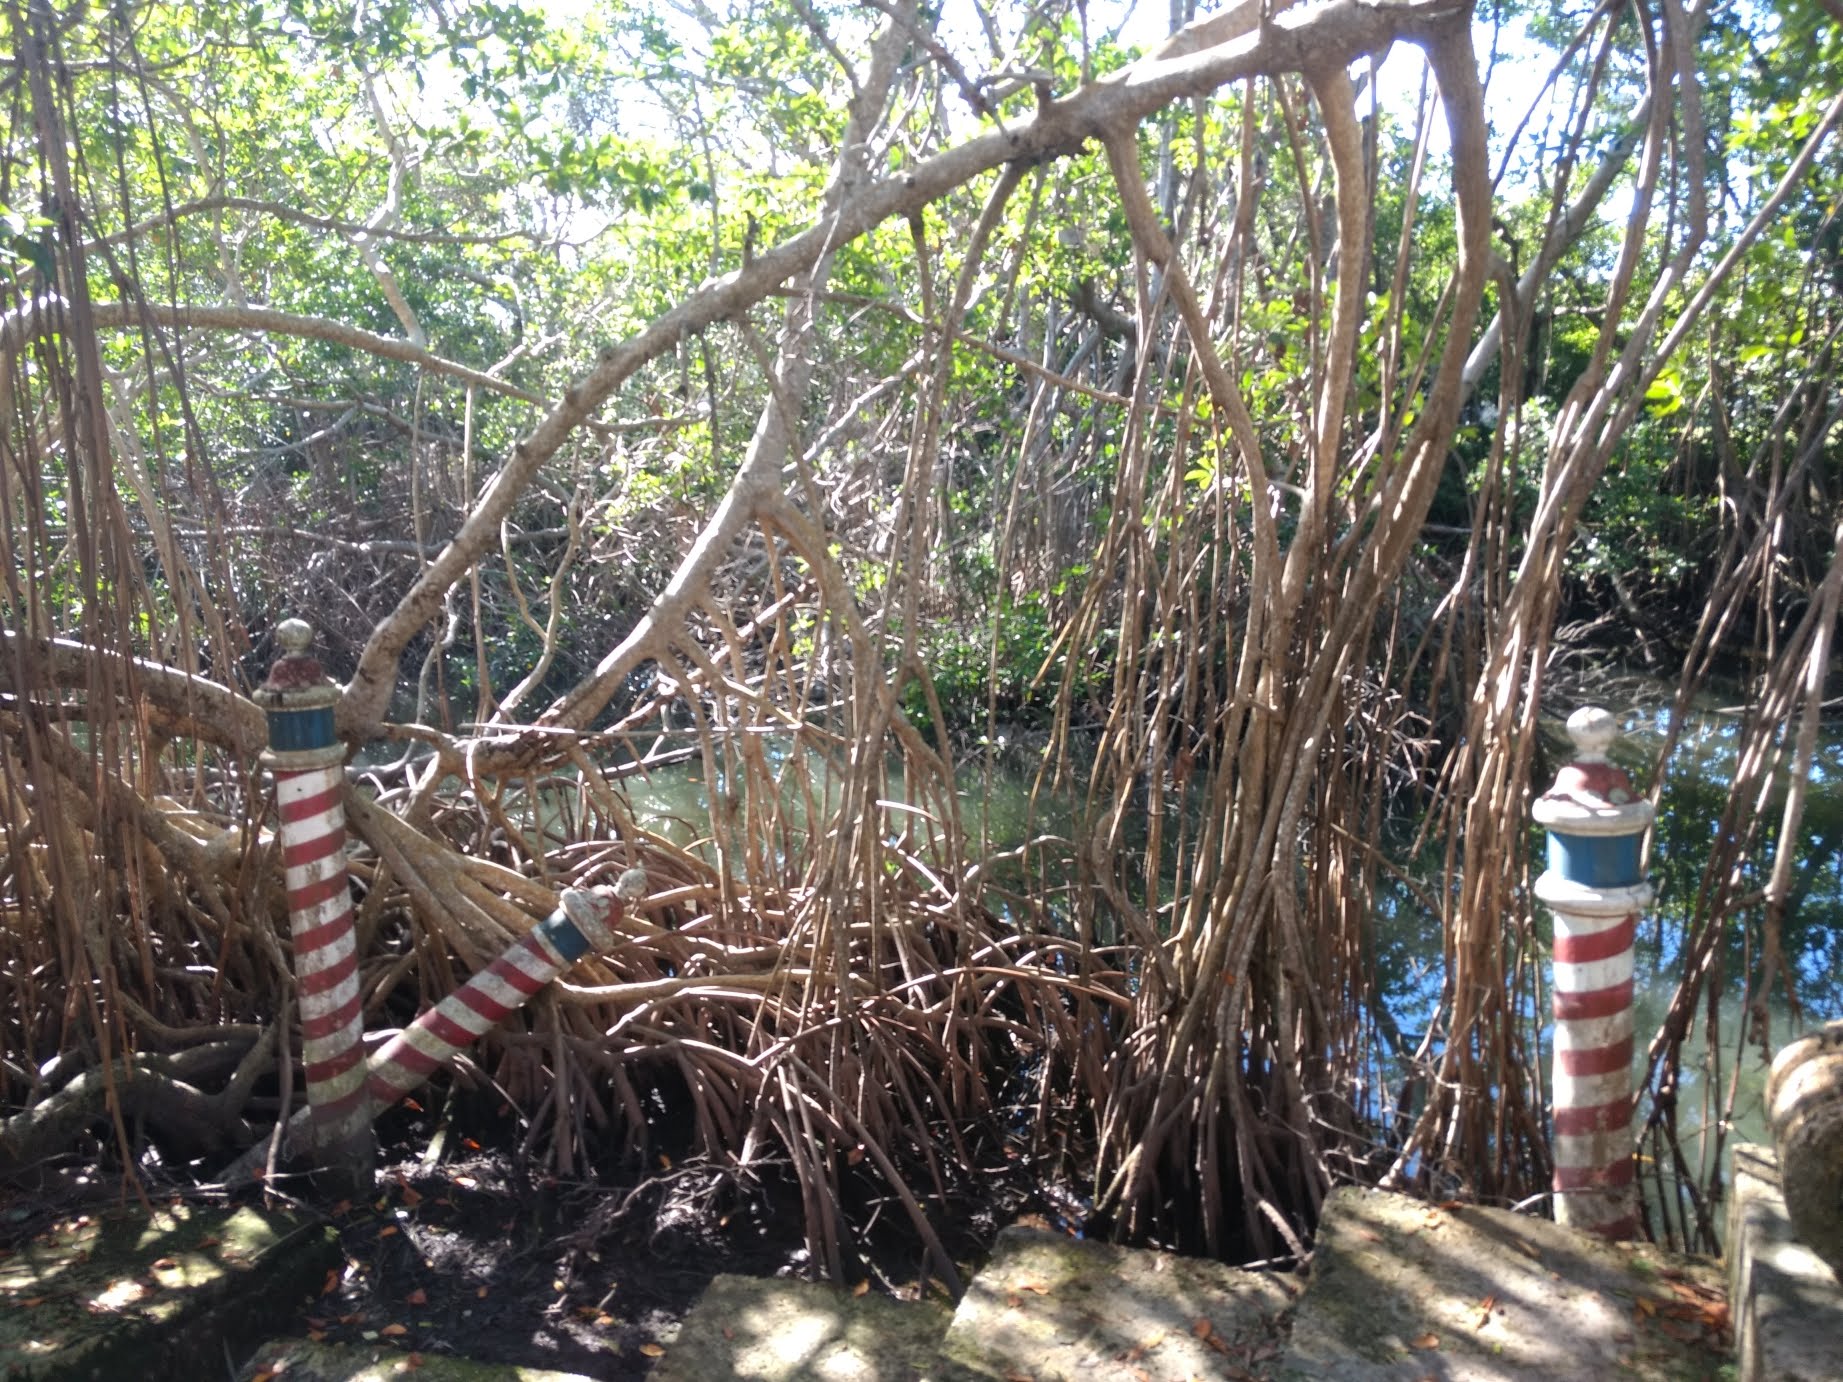 Mangrove roots doing their thing.